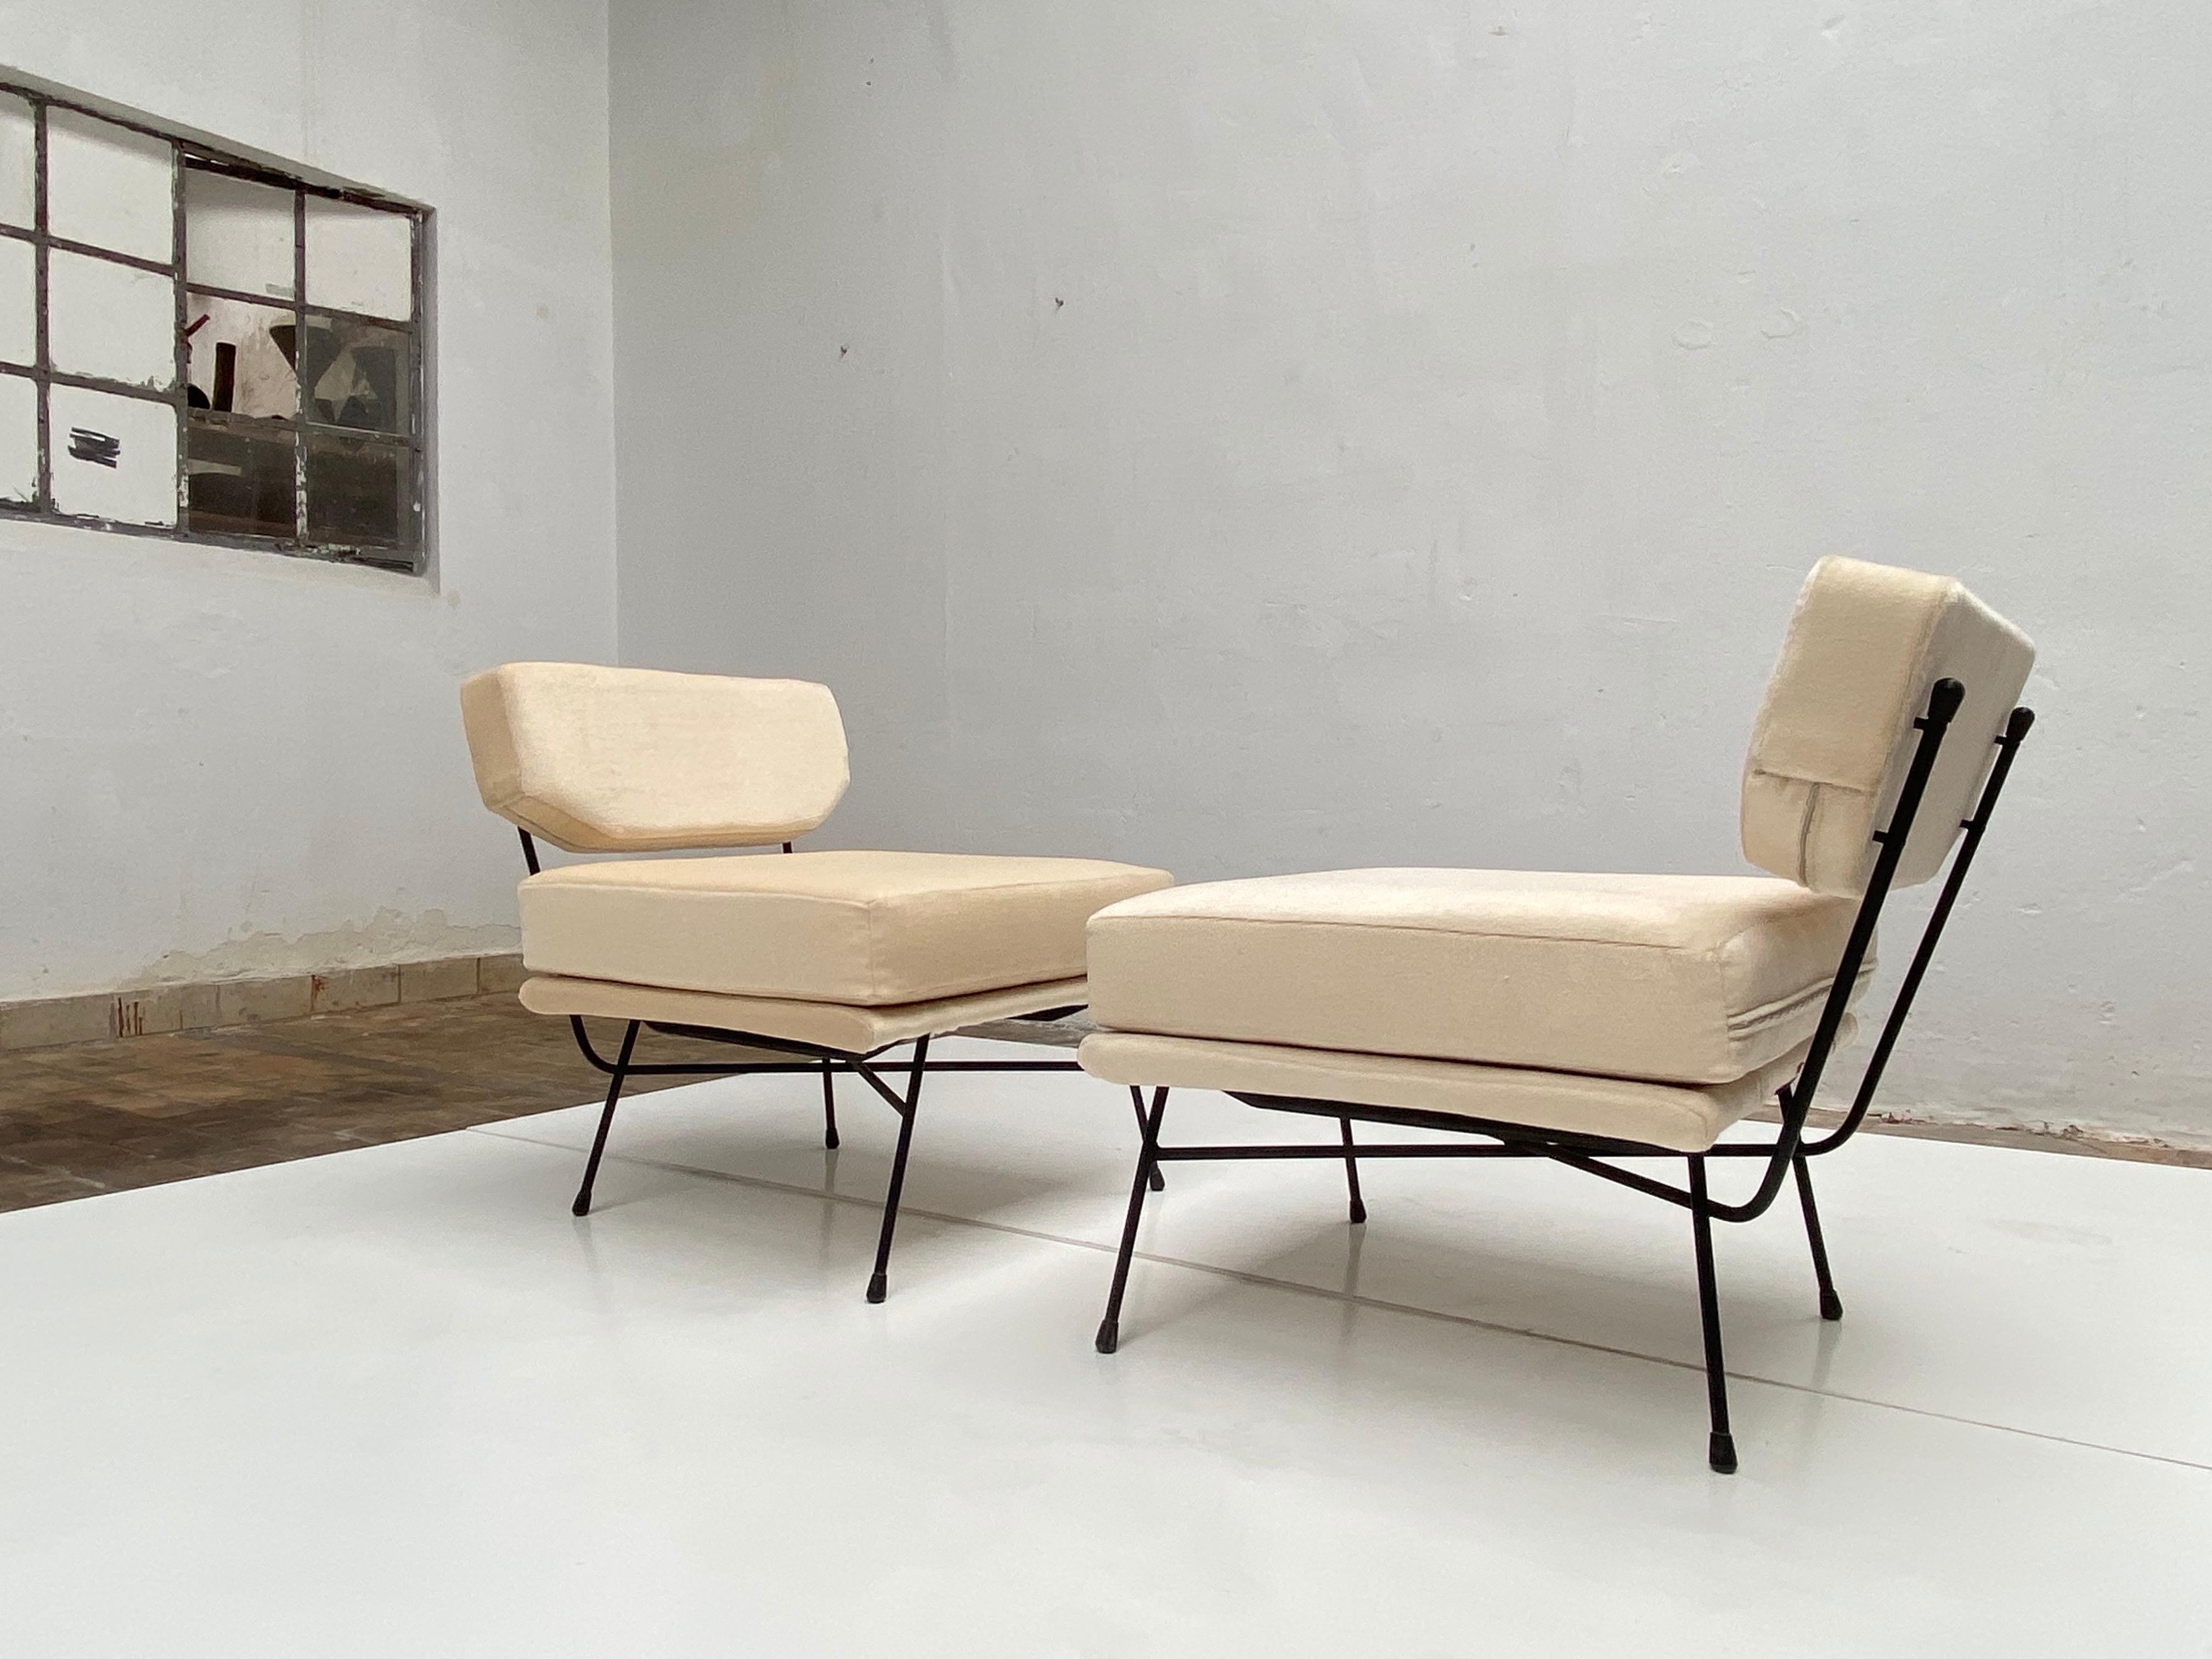 Enameled Pair of 'Elettra' Lounge Chairs by BBPR, Arflex, Italy 1953, Compasso D'Oro 1954 For Sale